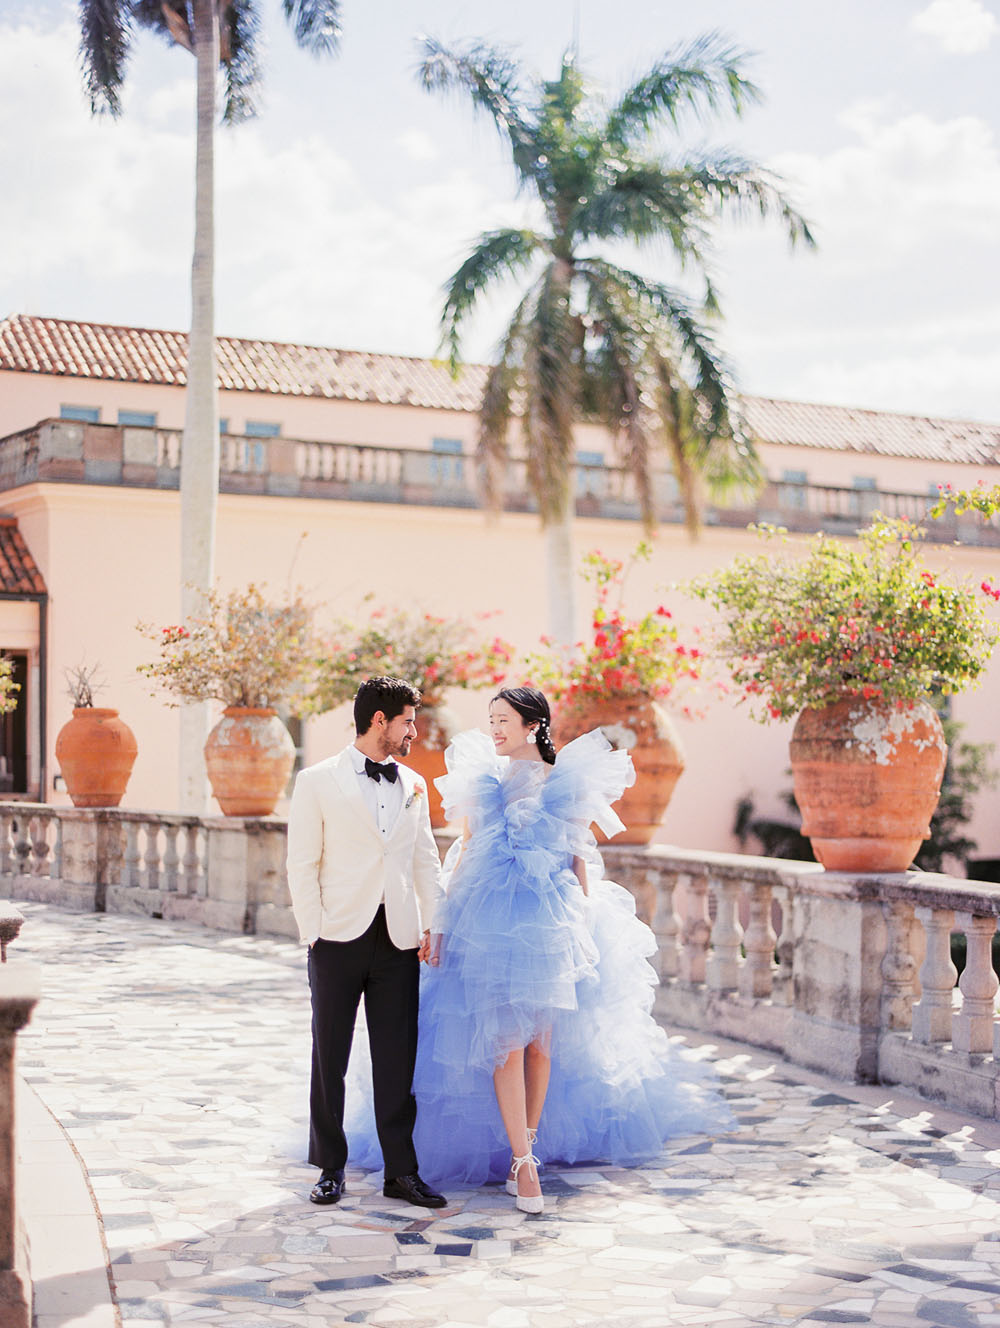 Romantic elopement inspo with a purple tulle gown